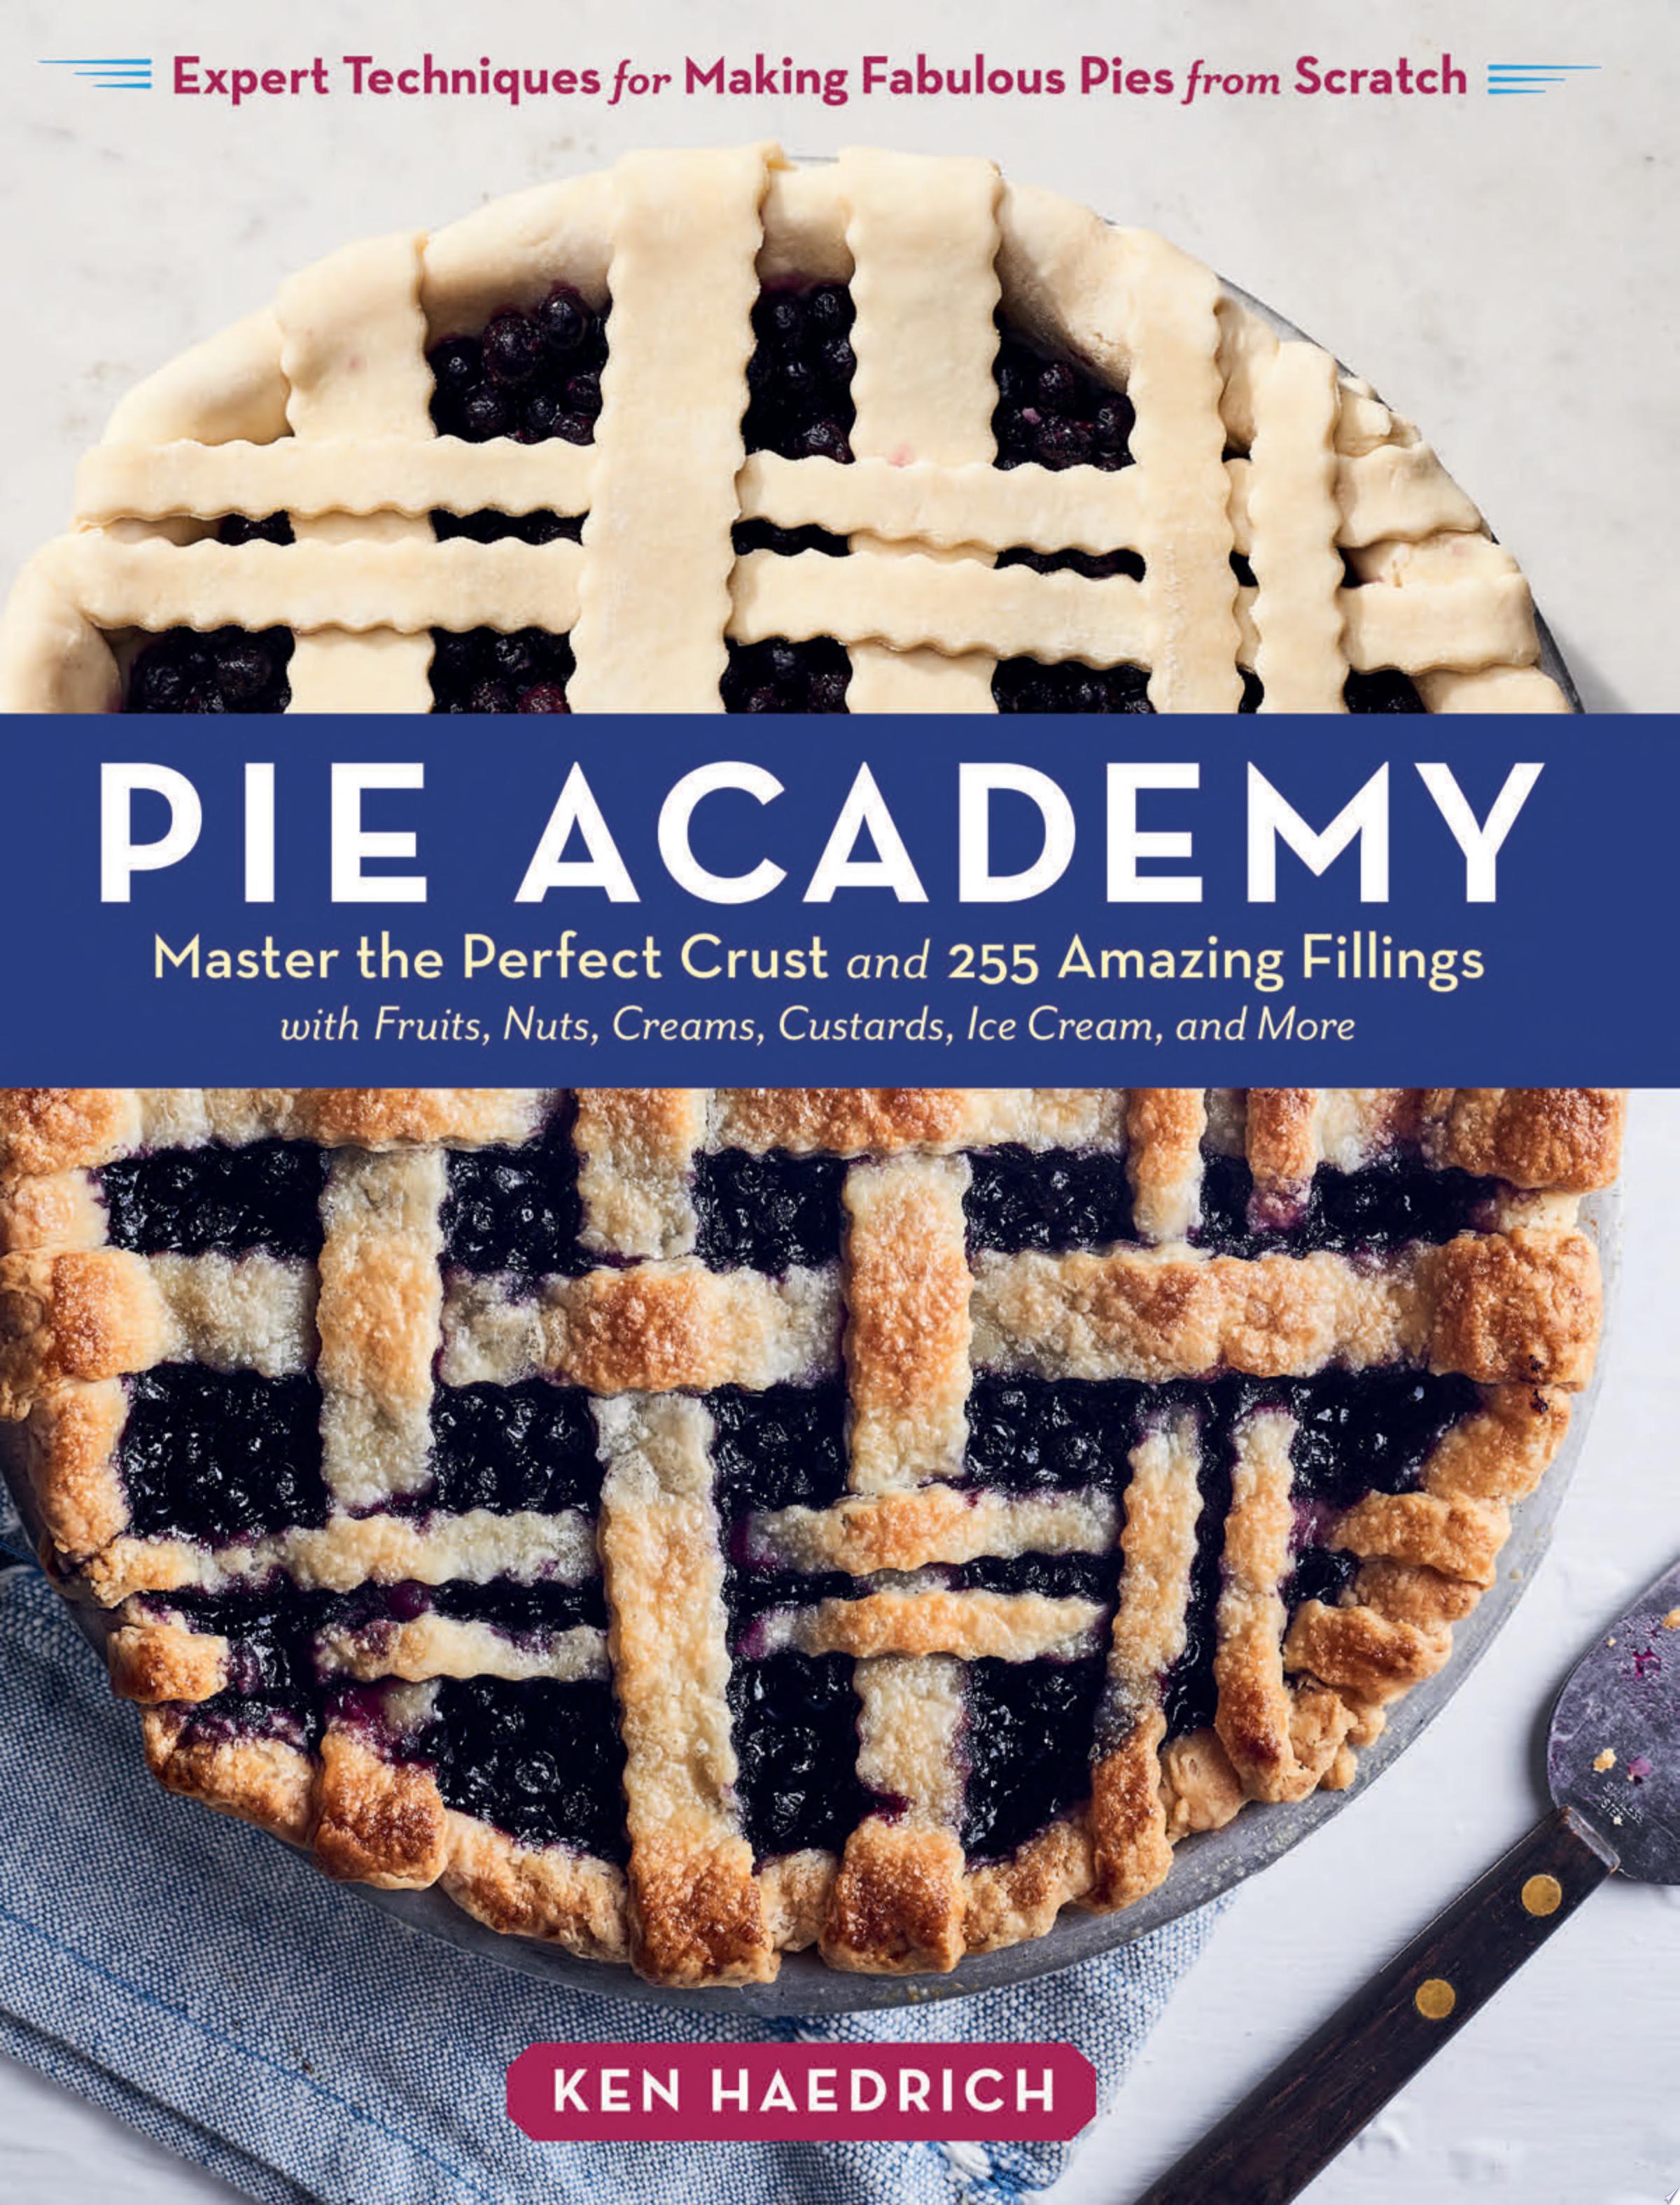 Image for "Pie Academy"